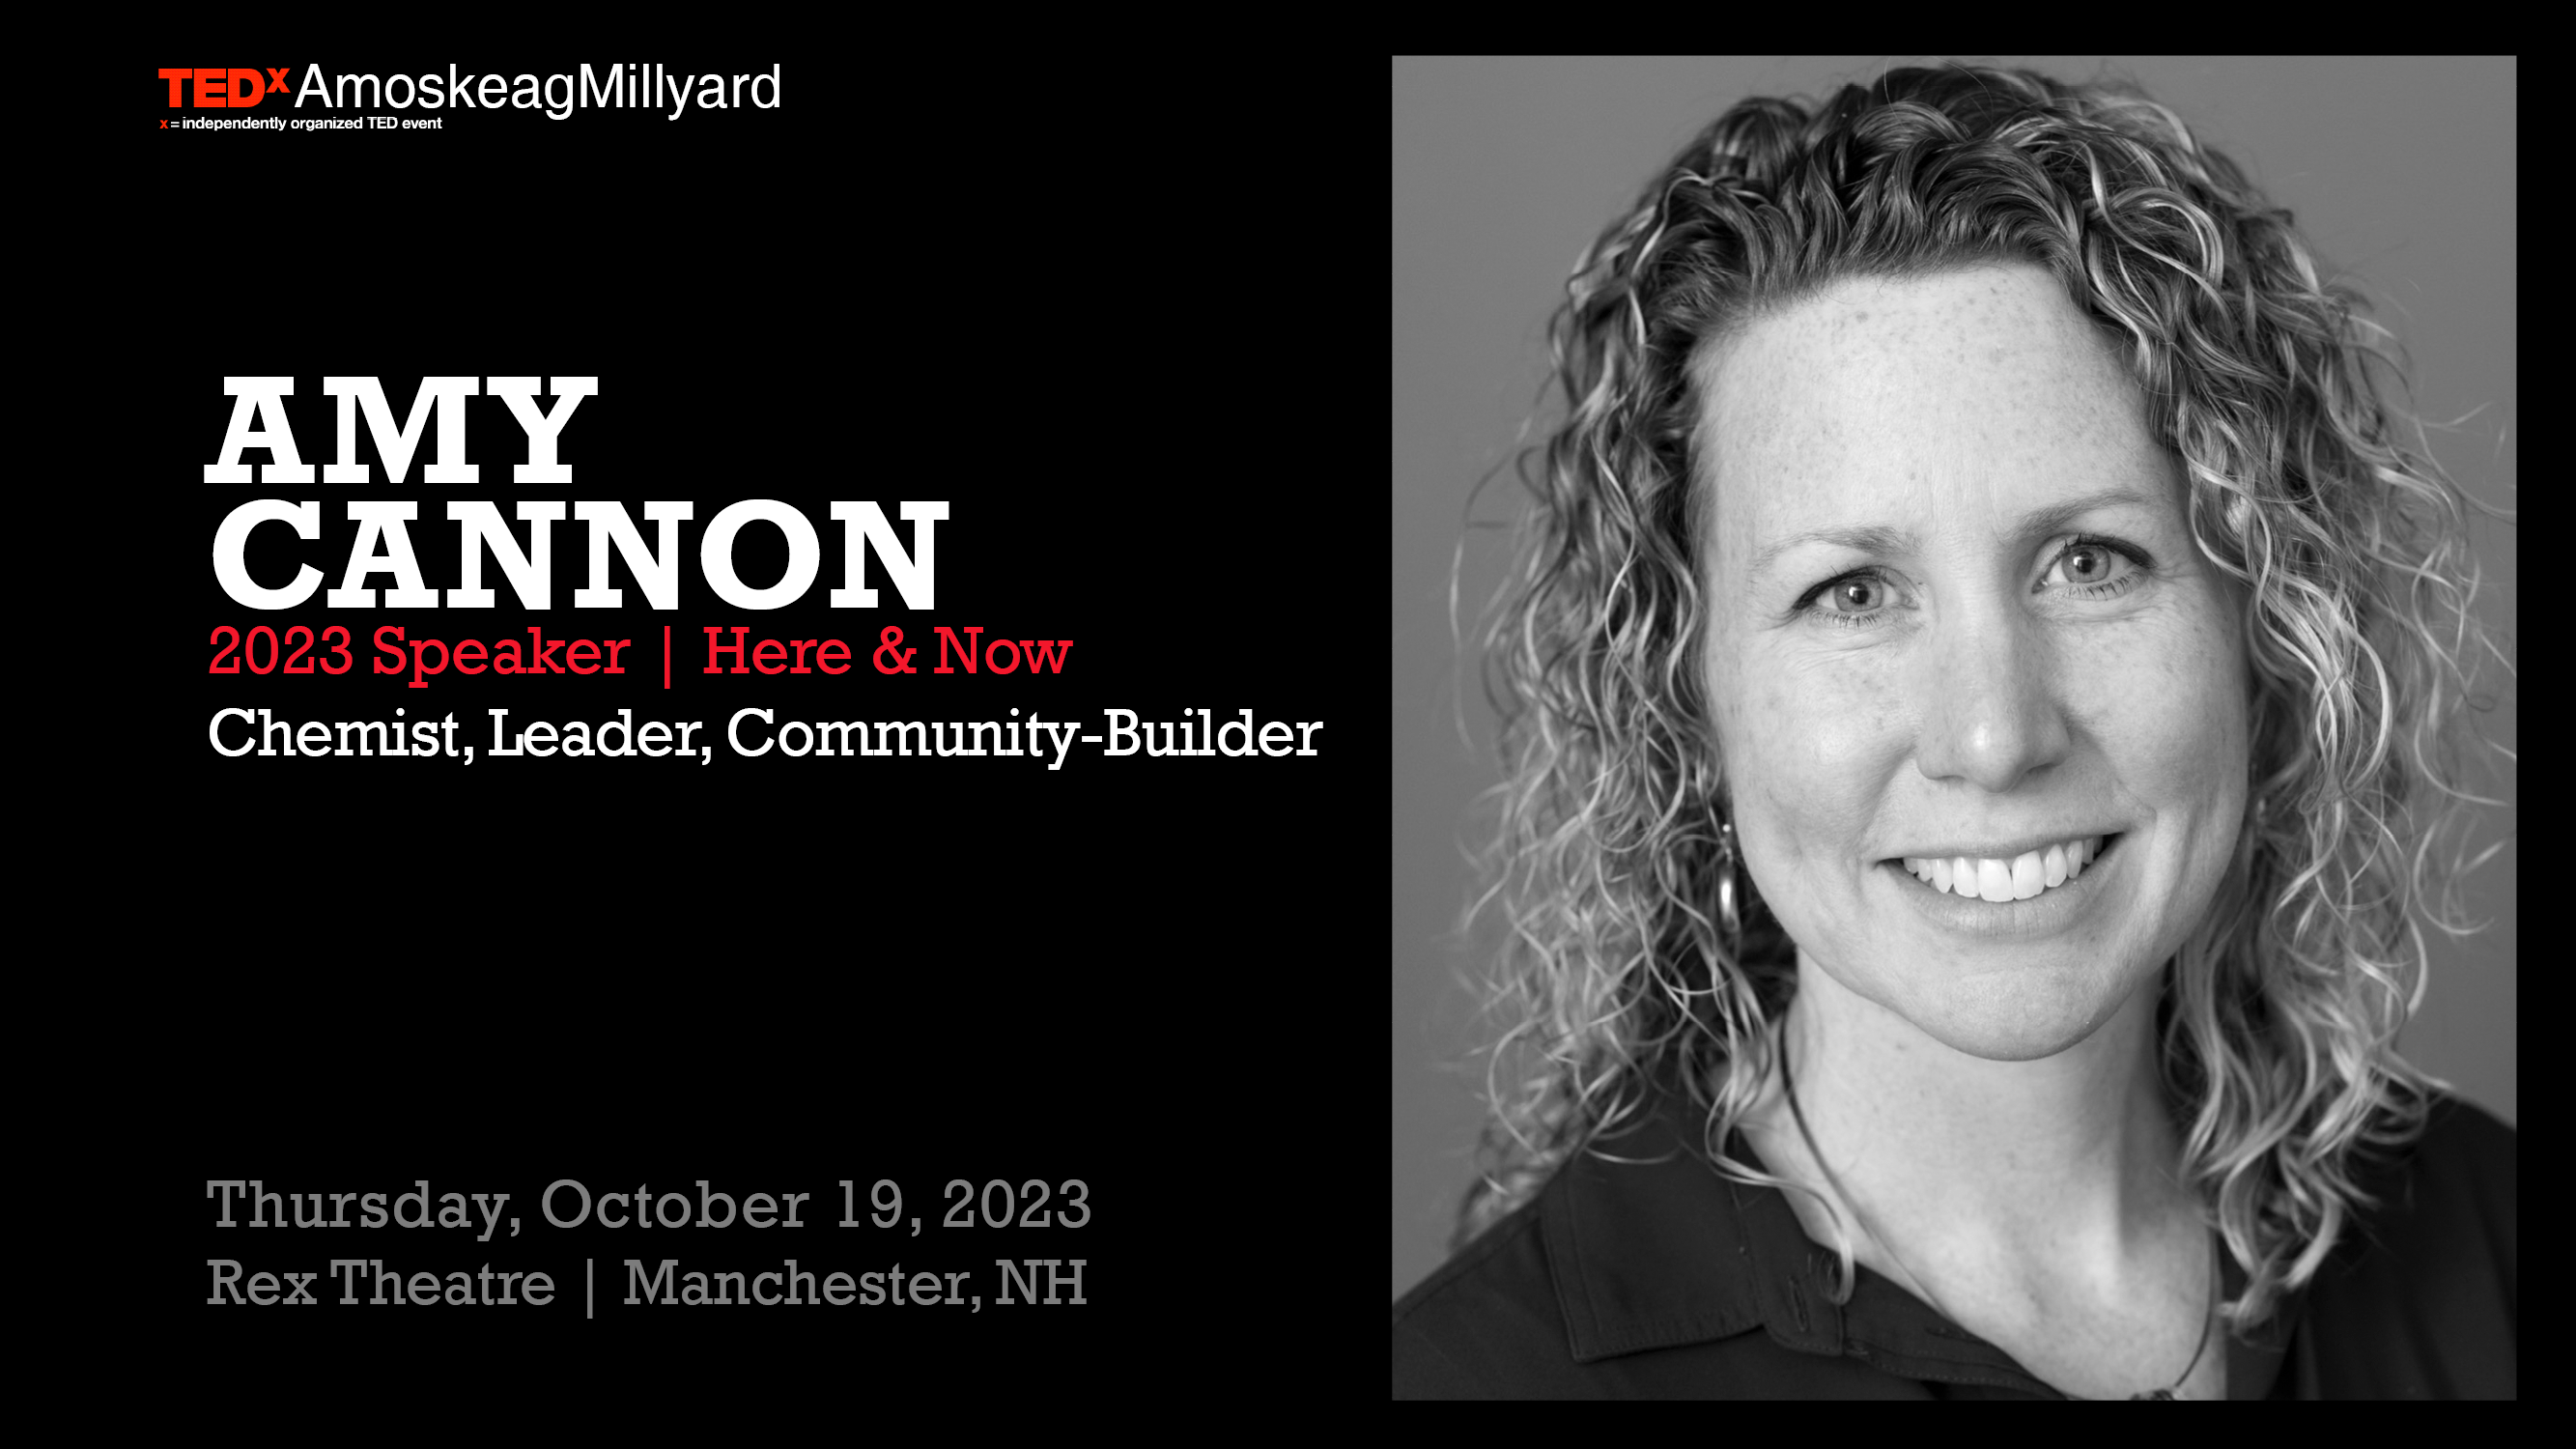 Graphic features Amy Cannon, a 2023 speaker at TEDxAmoskeagMillyard. Thursday, October 19, 2023.